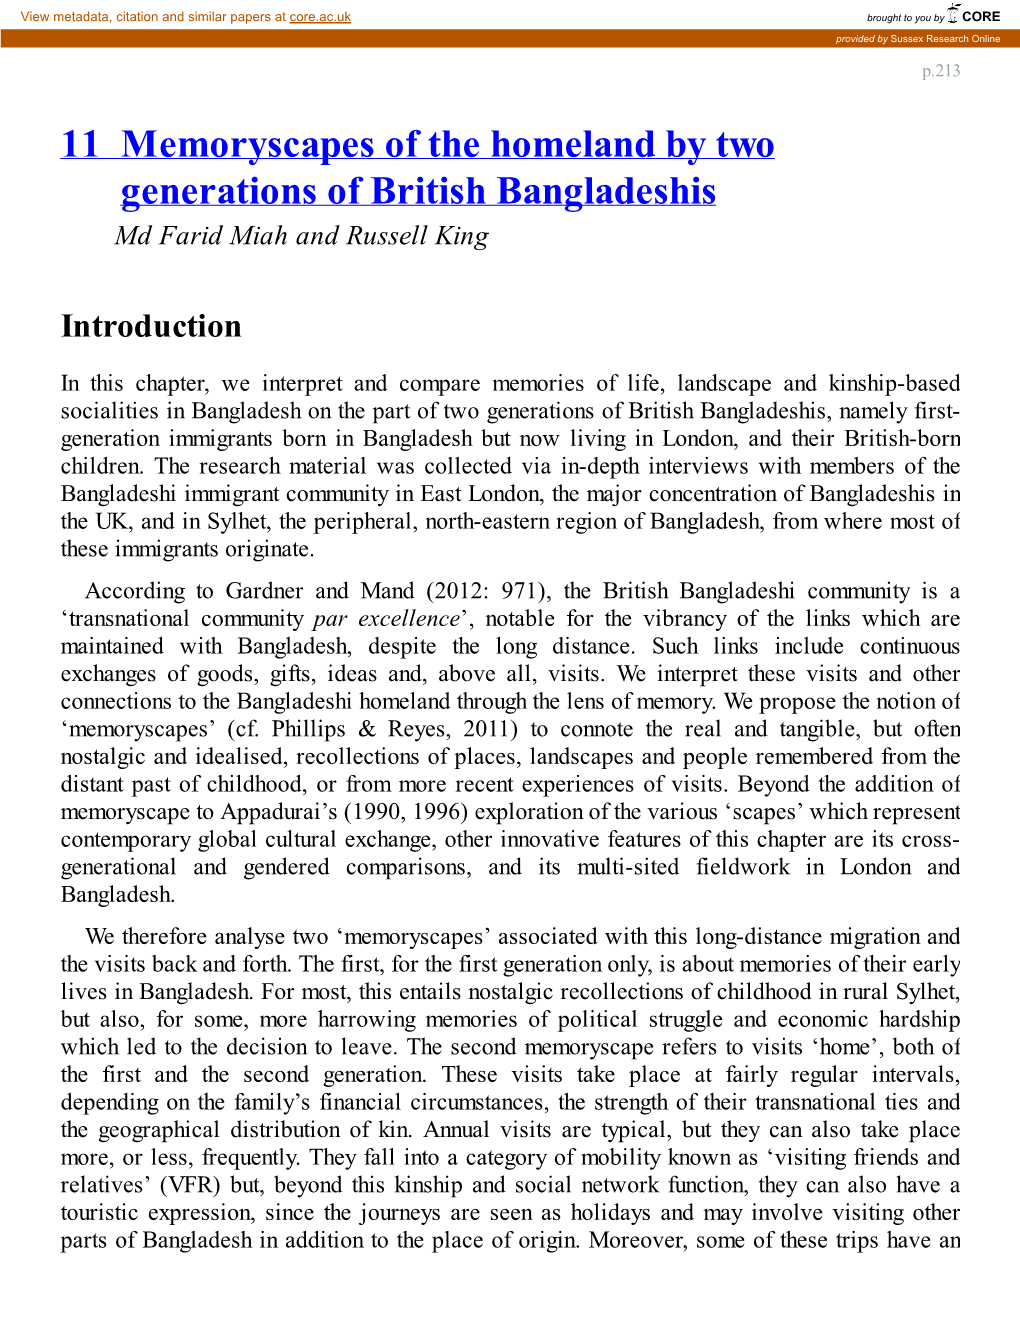 11 Memoryscapes of the Homeland by Two Generations of British Bangladeshis Md Farid Miah and Russell King